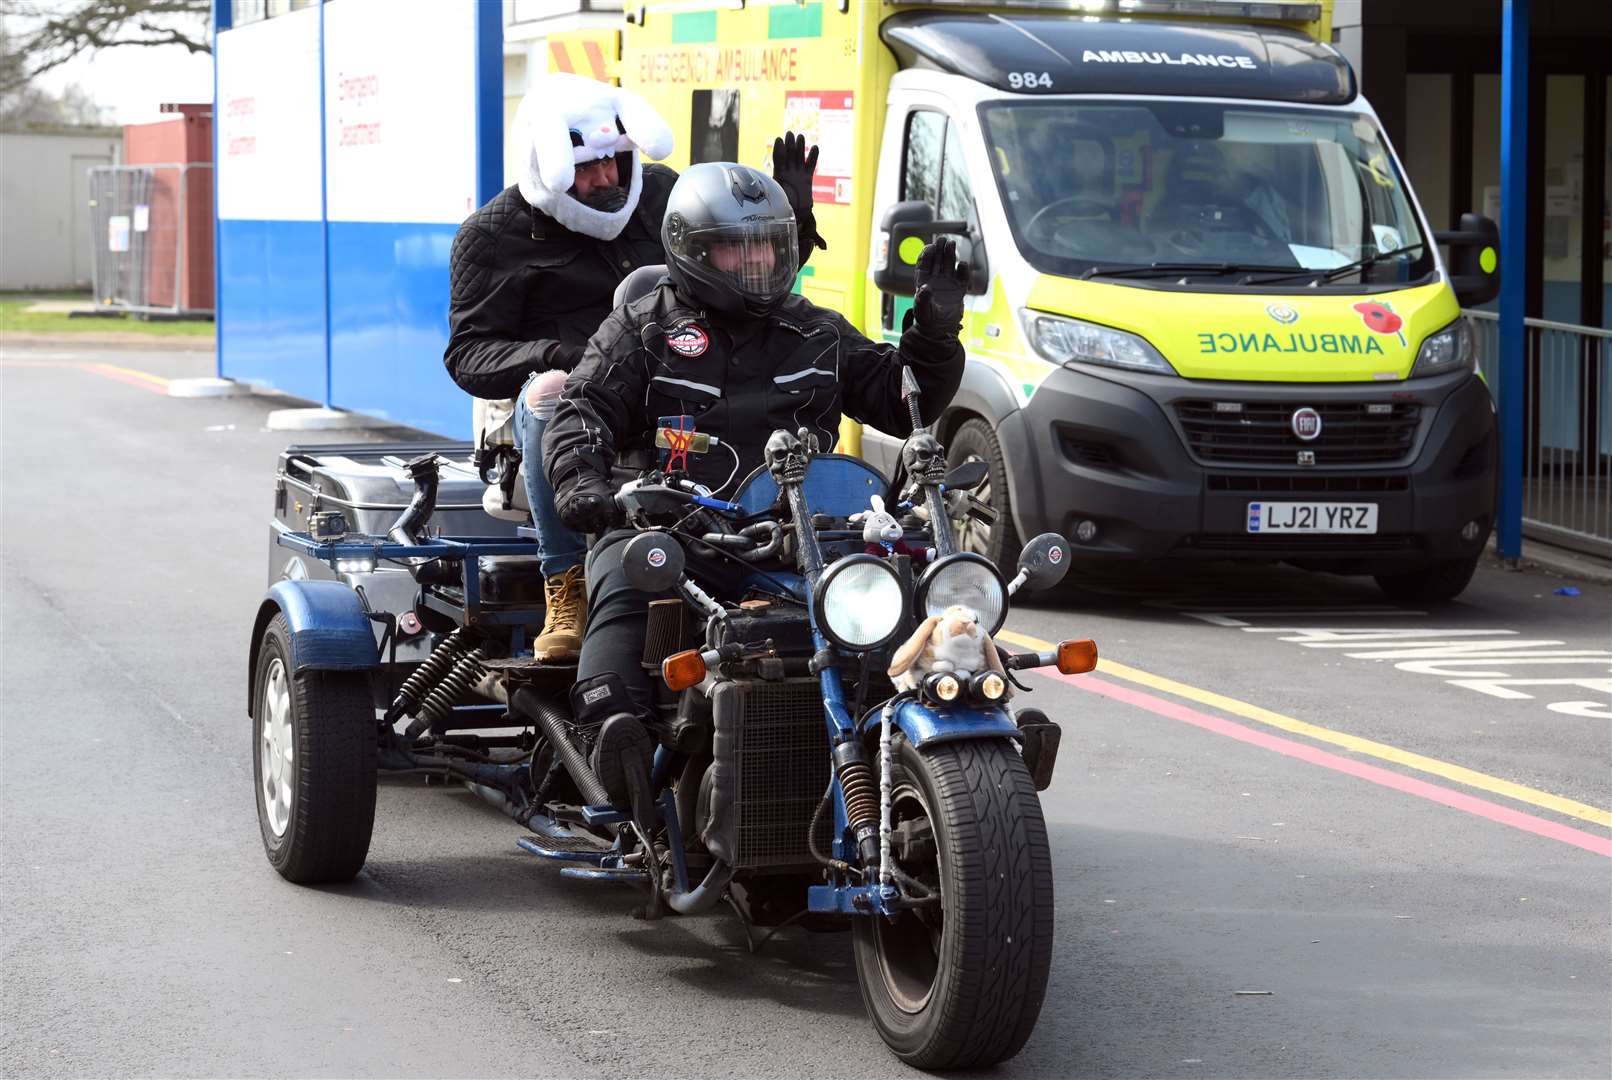 A variety of bikes and trikes made their way to the hospital on Easter Sunday